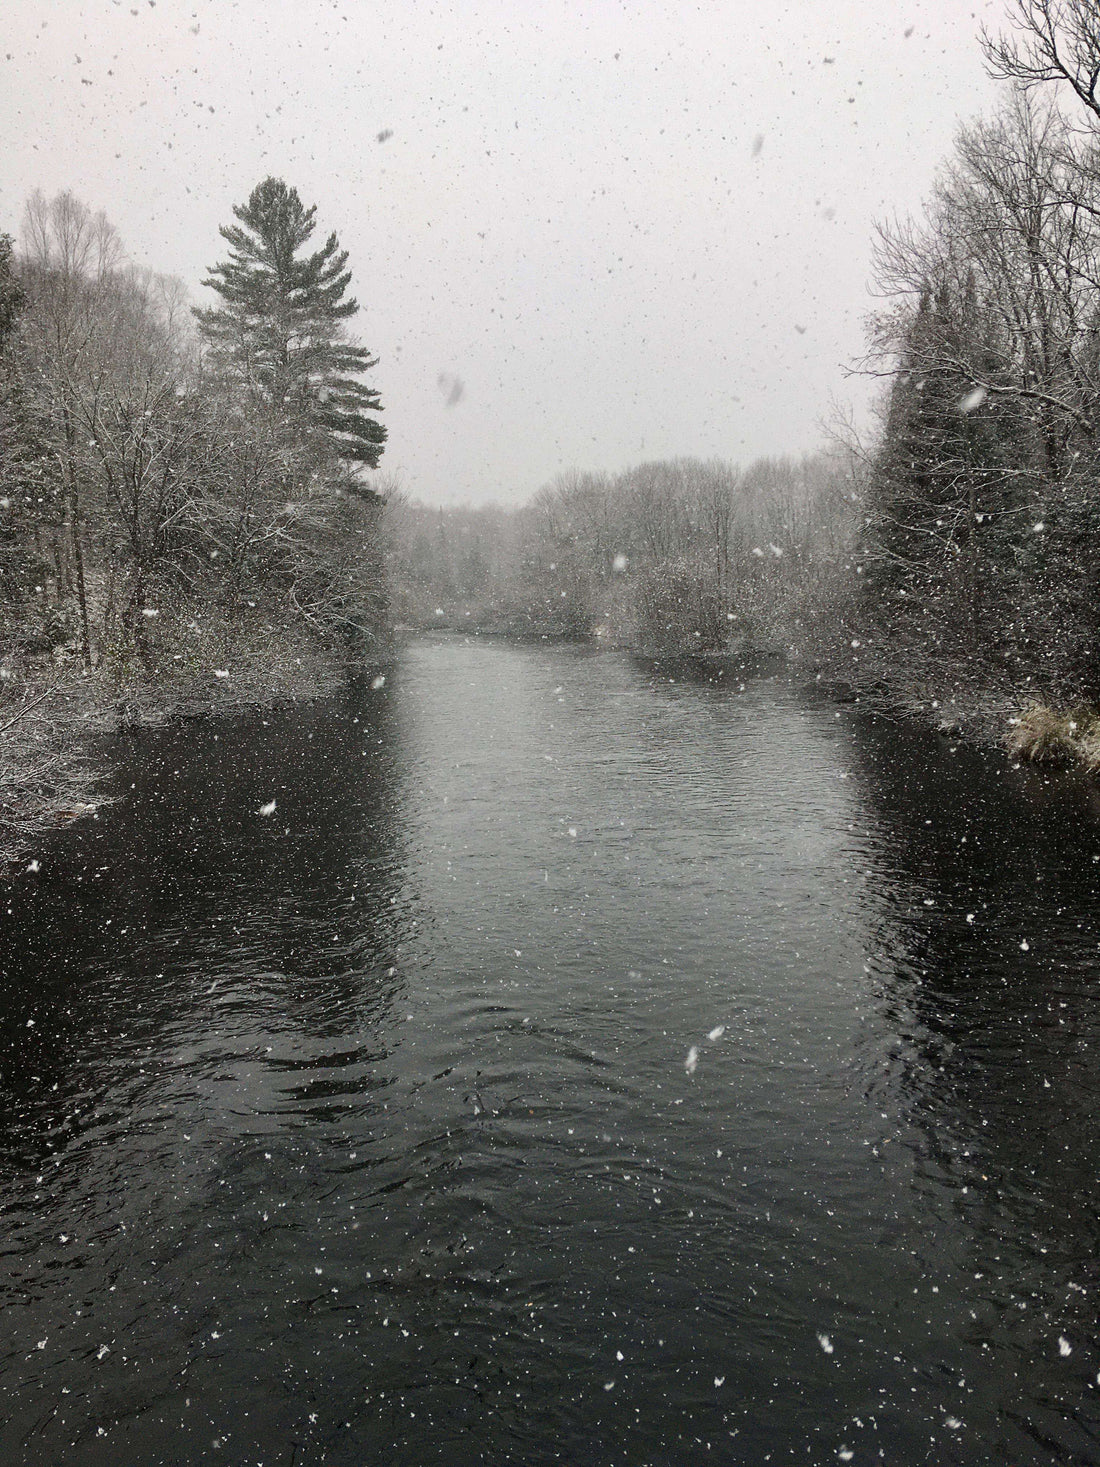 Snow falling on a river